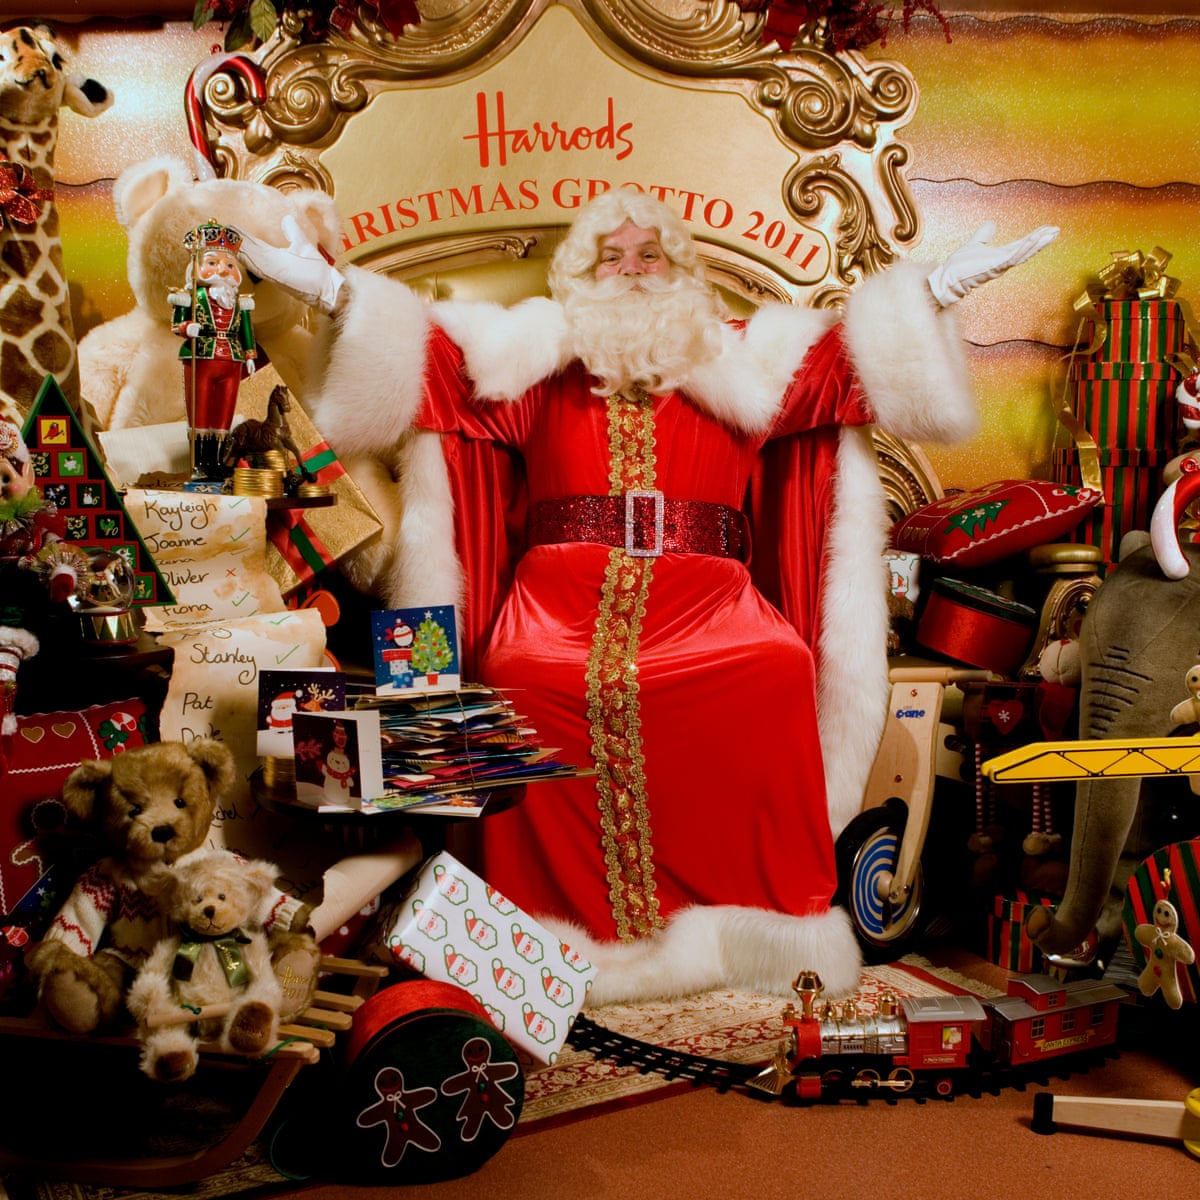 Harrods Limits Christmas Grotto To 2 000 Plus Spenders Harrods The Guardian